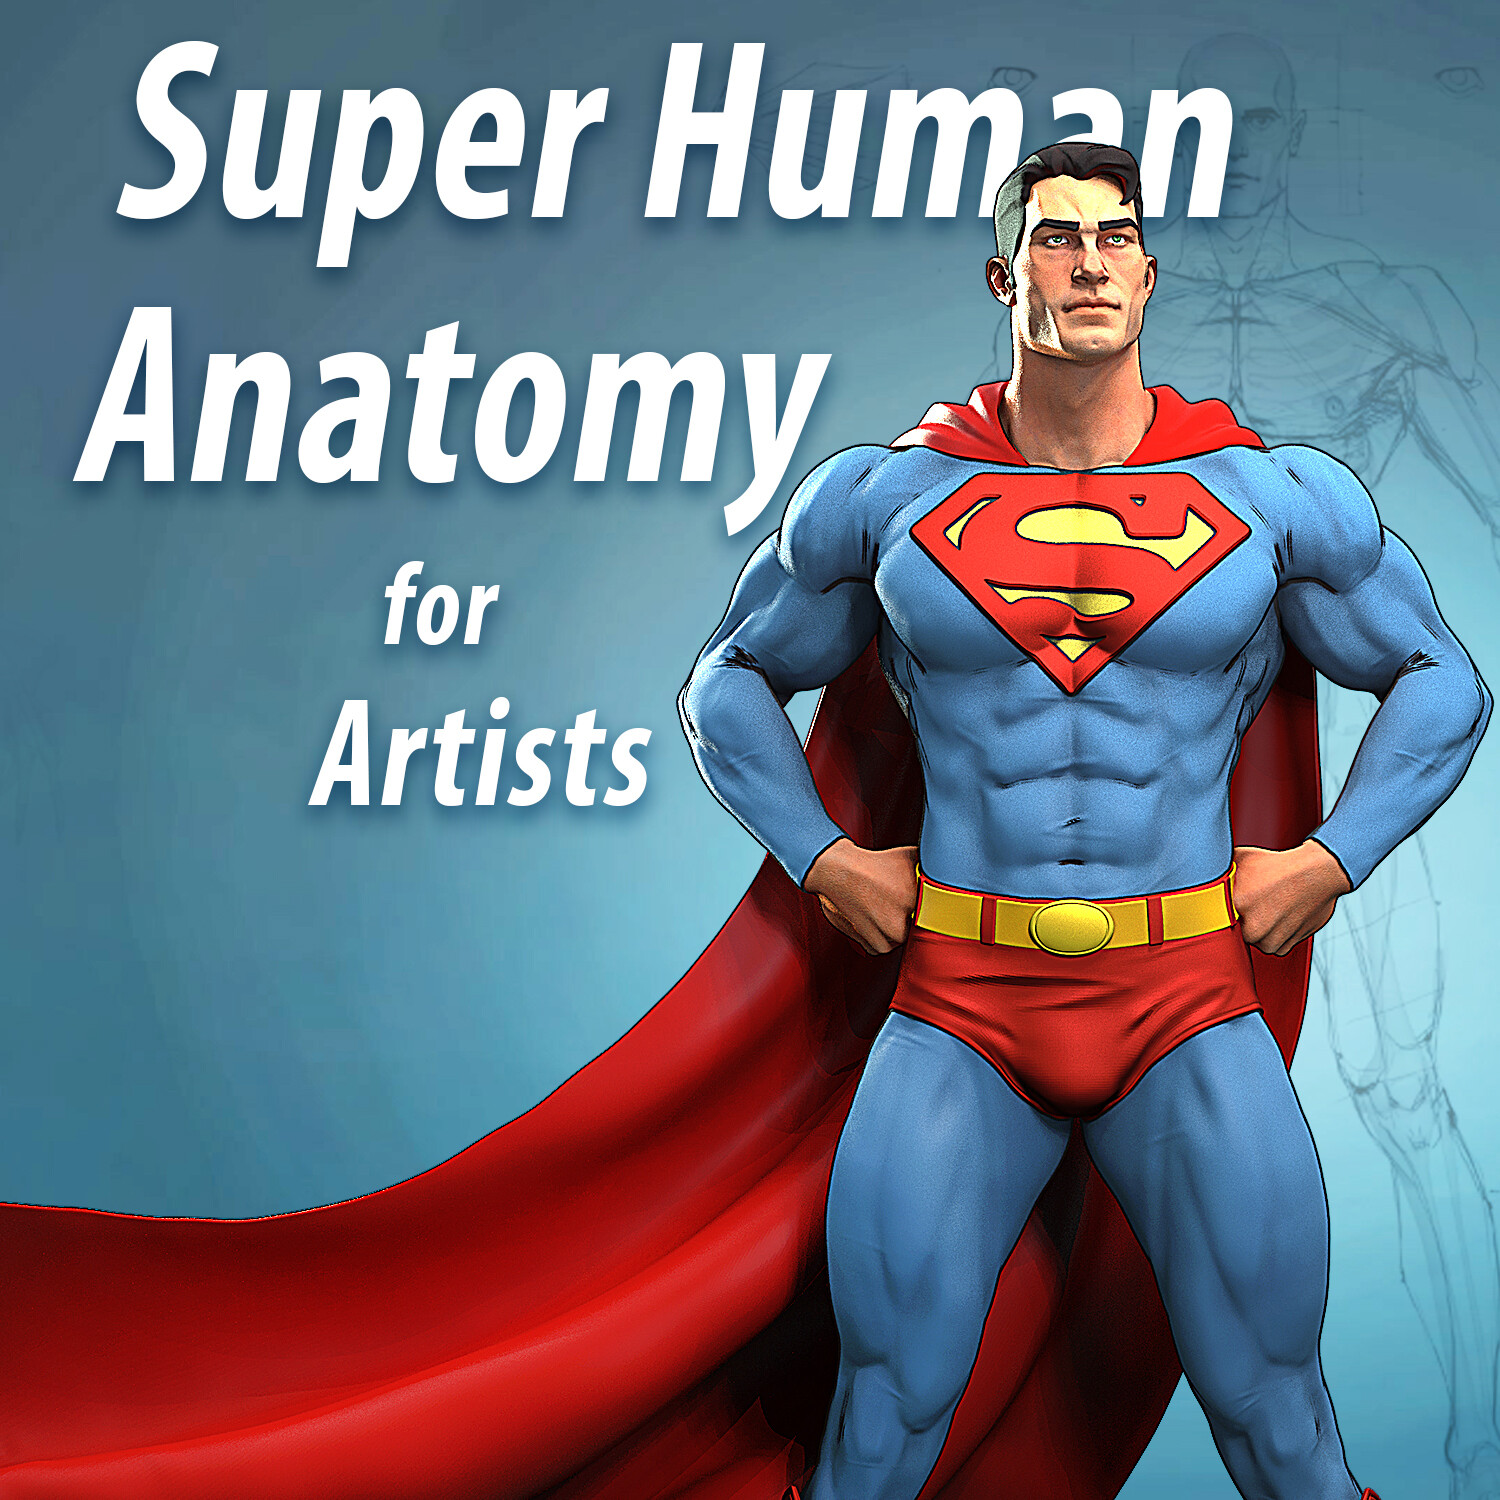 ArtStation - Super Human Anatomy for Artists course